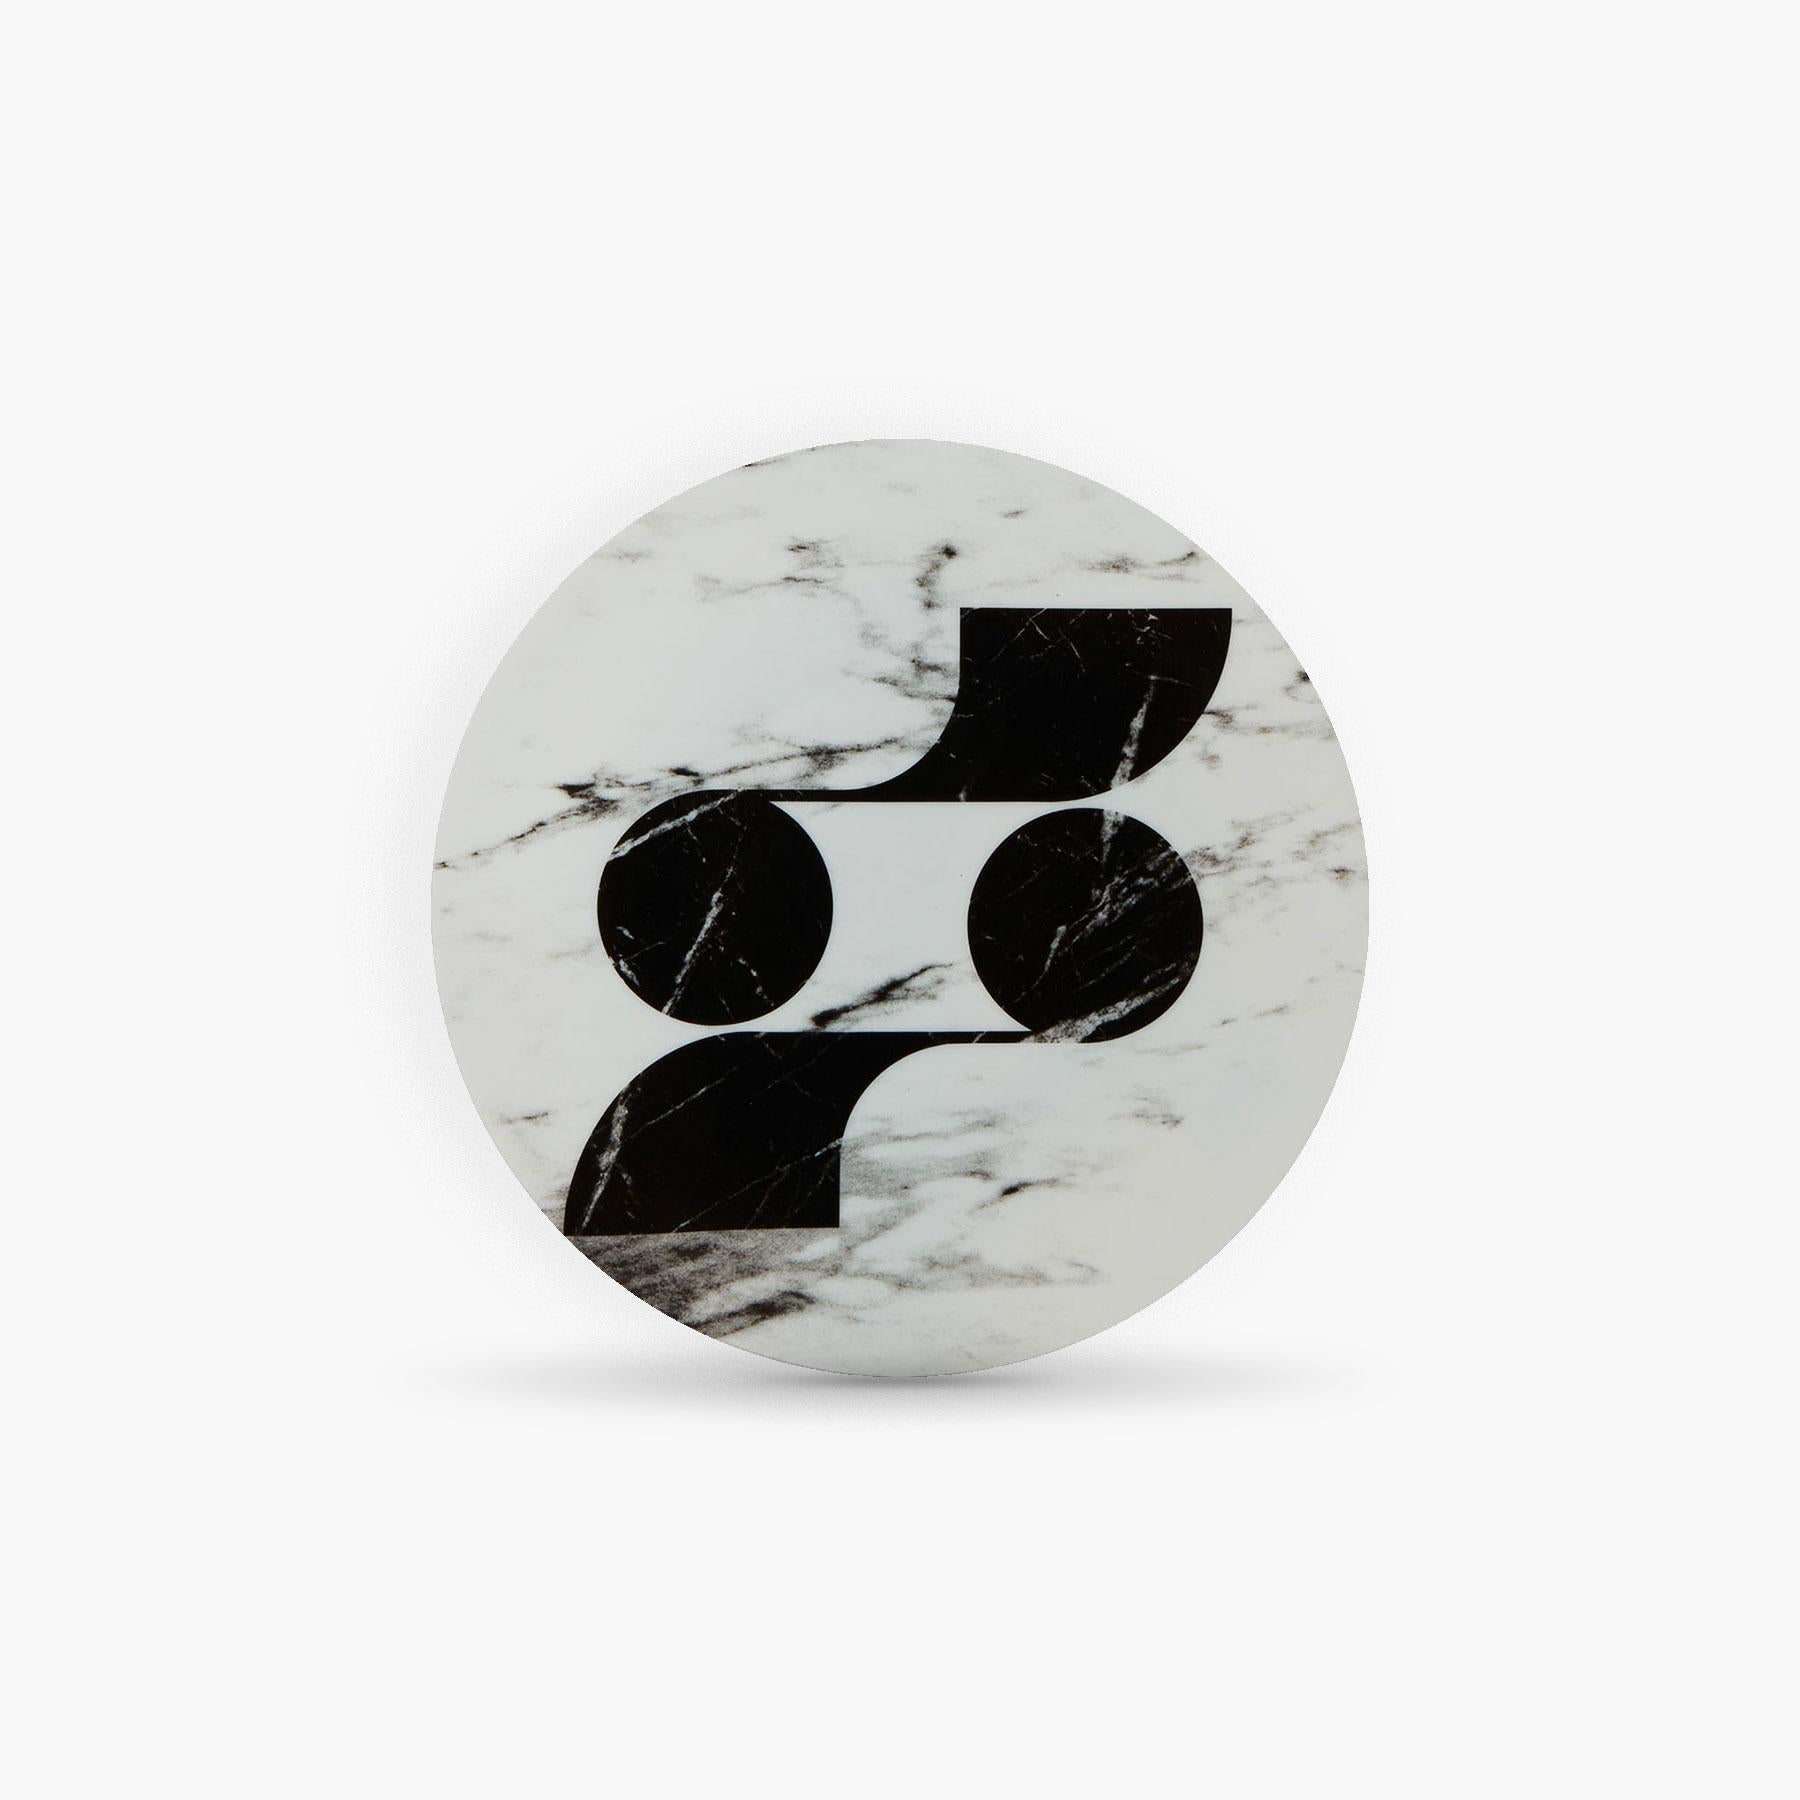 
Etienne Bardelli, plastic artist, interprets in his own way the architecture of Rue de Paradis: A sweet mix between the 1930s and the 1970s.

Porcelain of Limoges extra fine.
Black and white serigraphy.
Diameter: 21 cm 
Height: 1.4 cm
Weight: 0.208